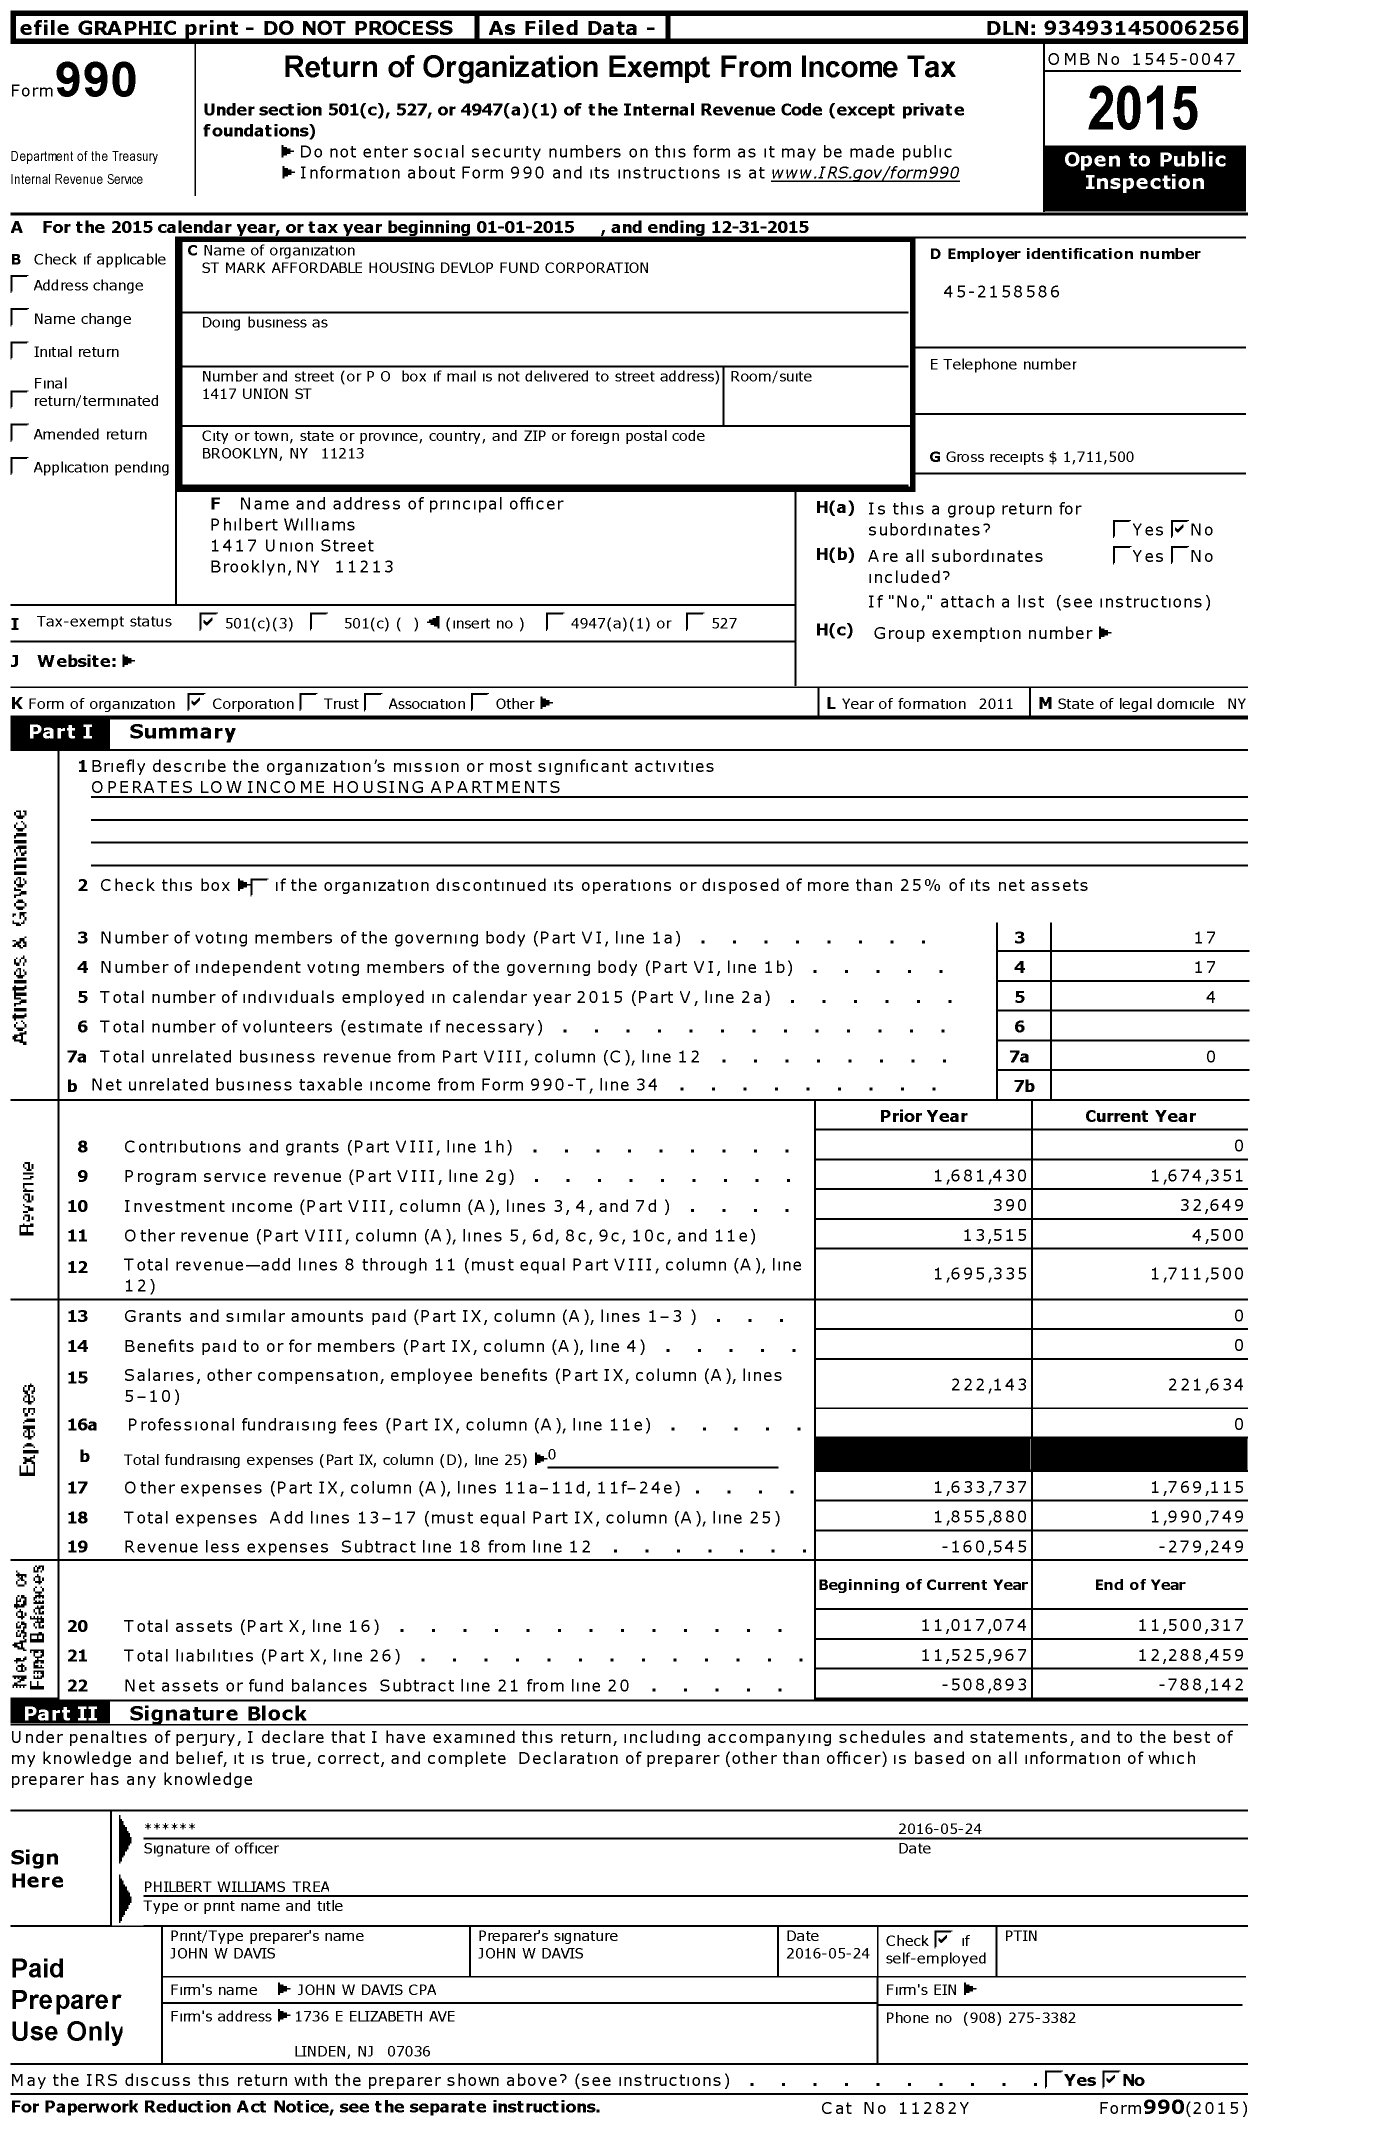 Image of first page of 2015 Form 990 for St Mark Affordable Housing Devlop Fund Corporation